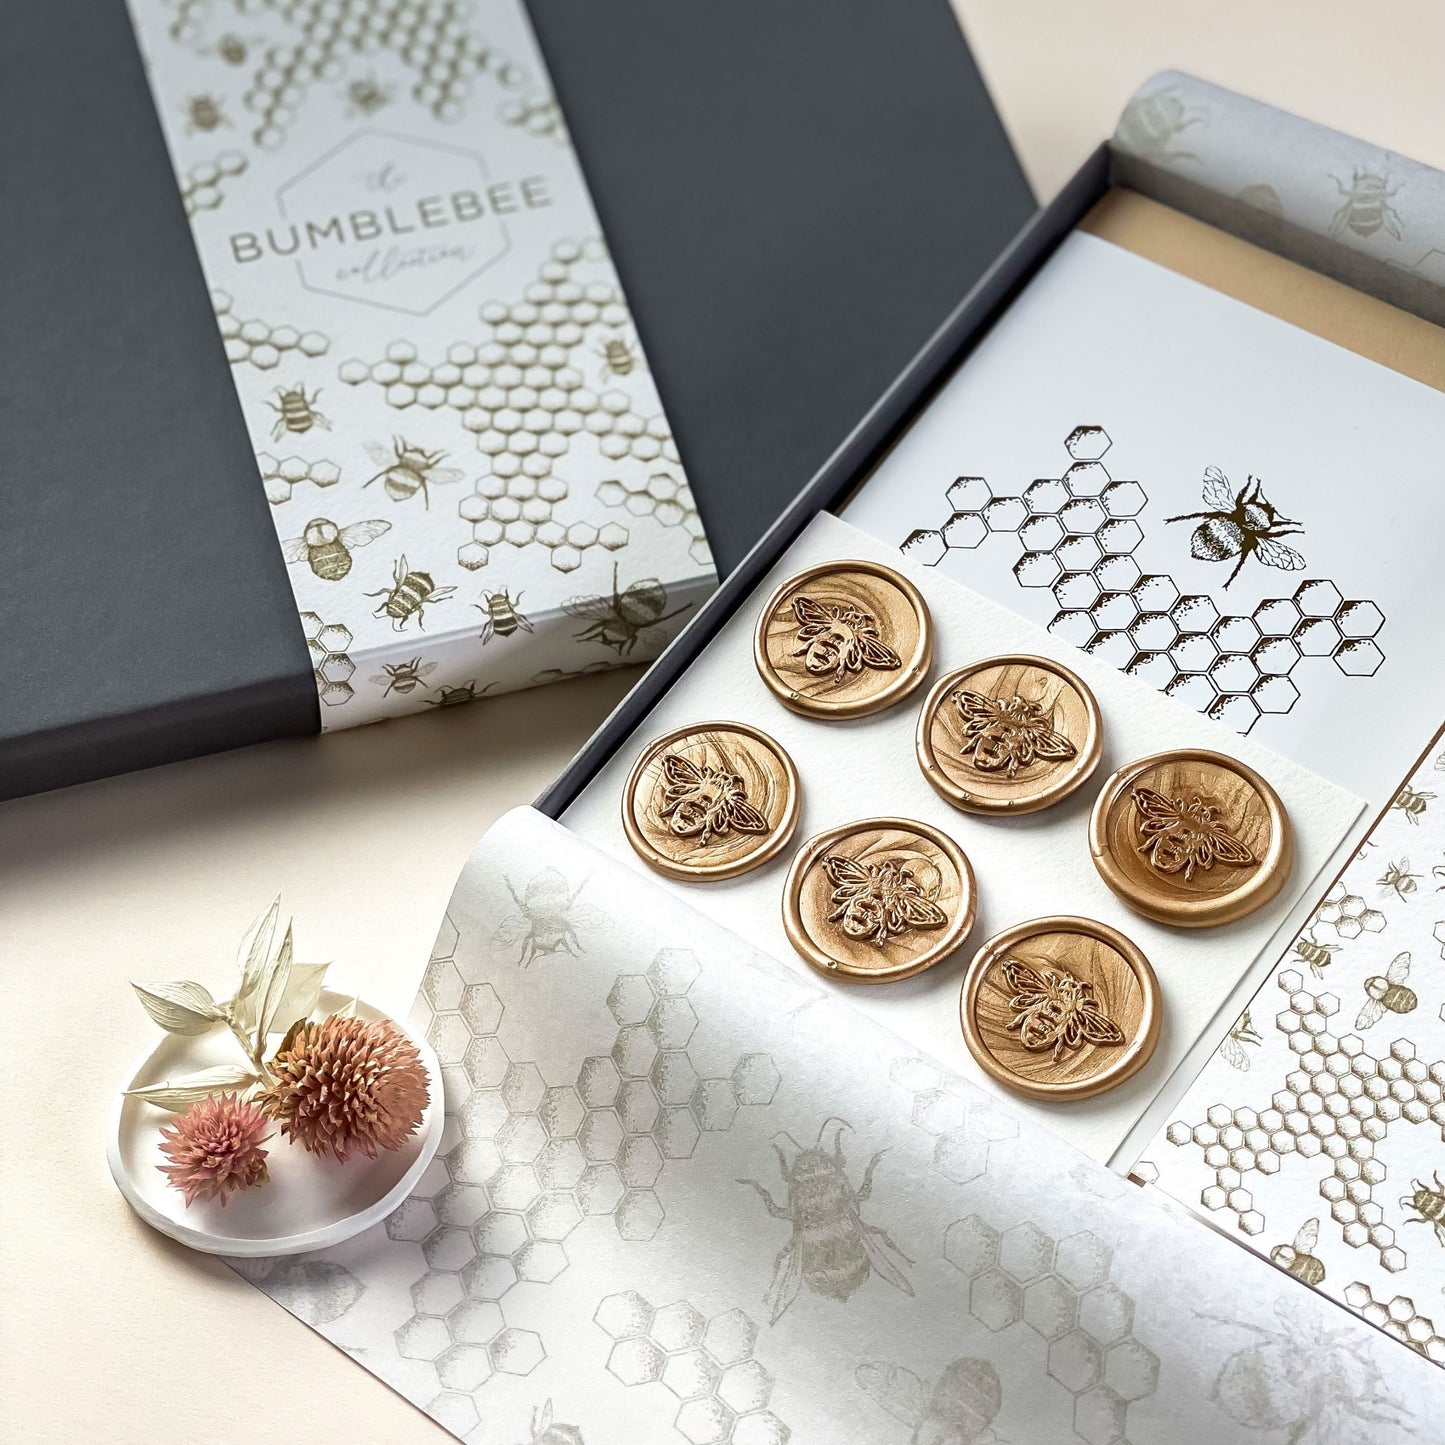 Luxury bumblebee stationery set, hand illustrated - greeting cards, tissue paper, stickers & wax seals. A premium themed gift box collection.